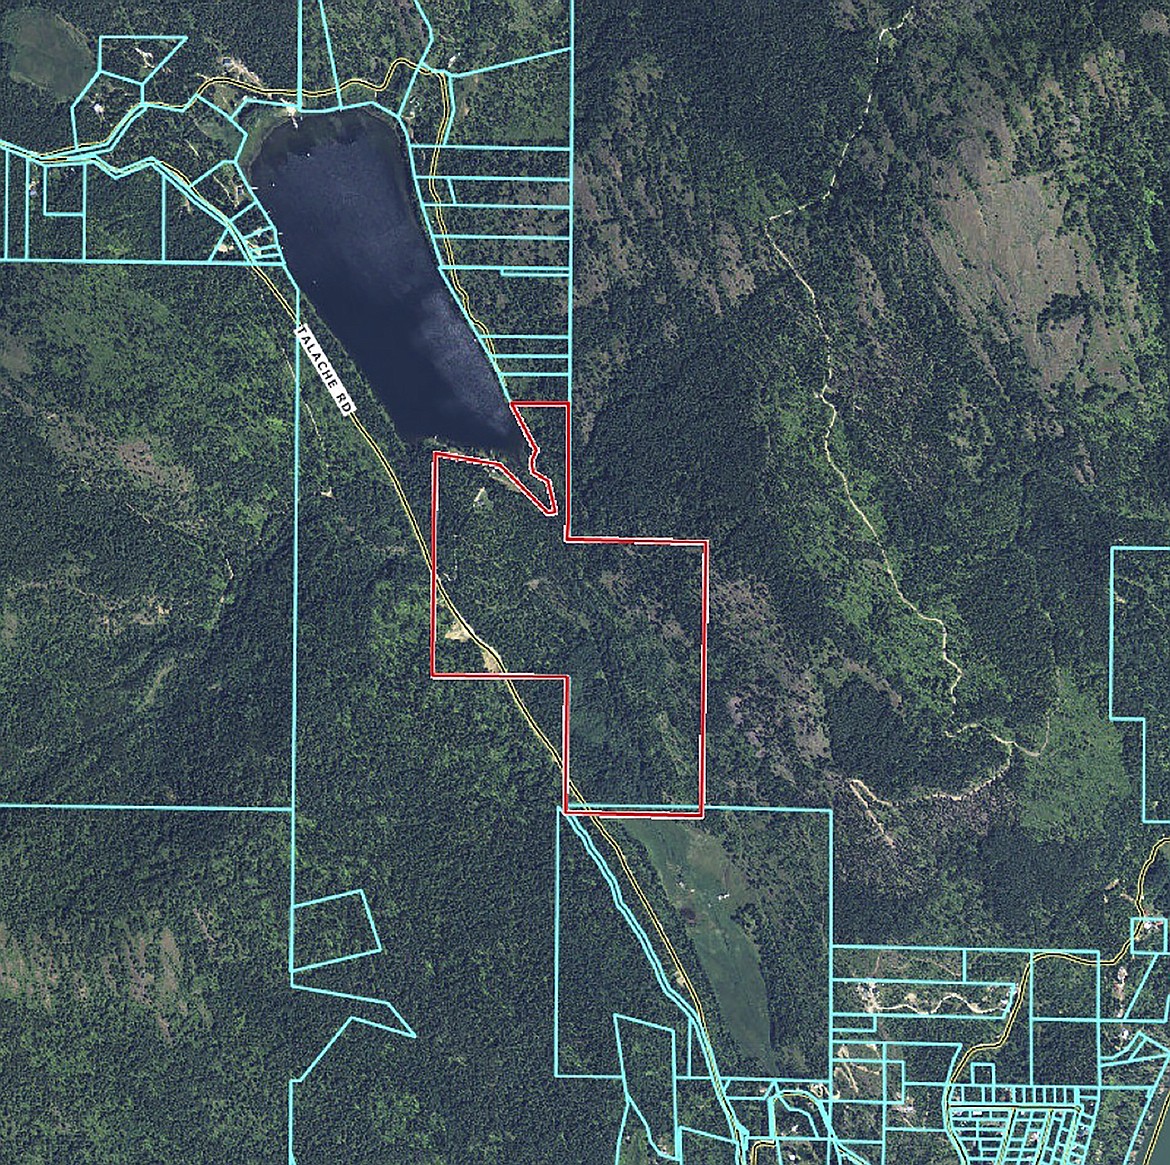 The red outline shows the boundaries of Camp Stidwell. Owned by the Sandpoint Kiwanis Club, the 160-acre site is now protected from through a conservation easement agreement which preserves its original intent as a rustic campground while restricting subdivisions, commercial facilities and other development.